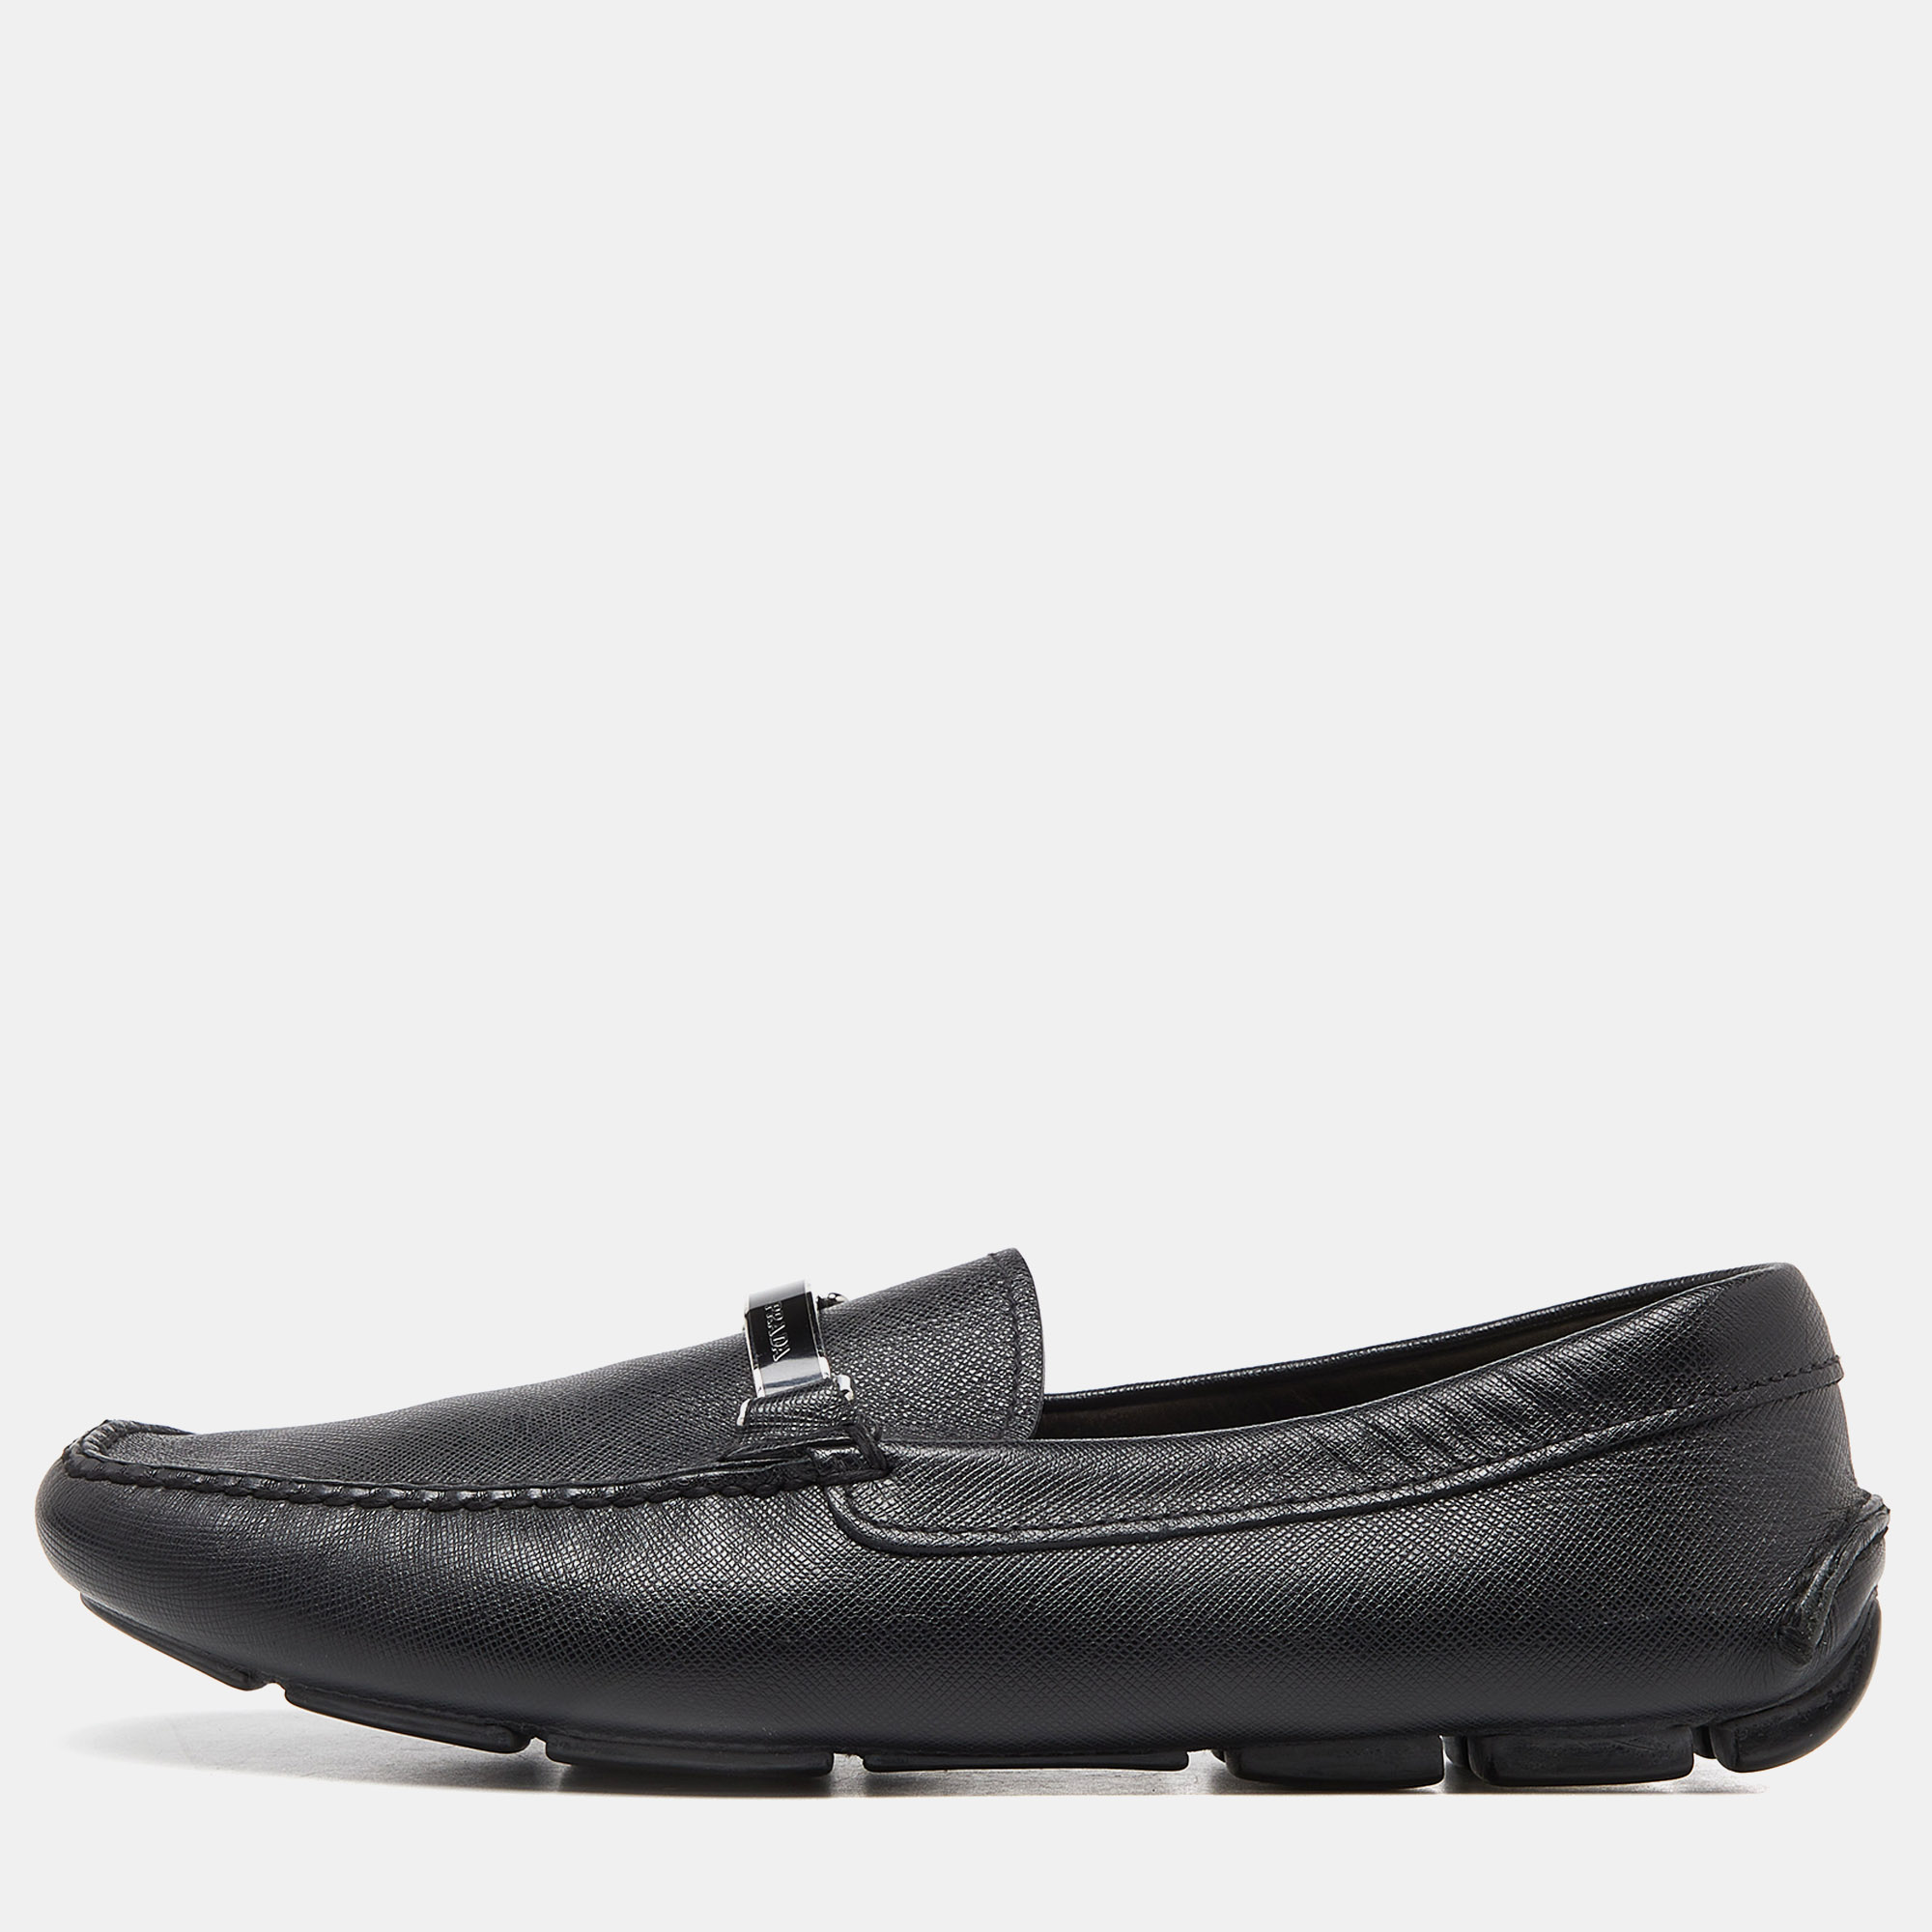 Pre-owned Prada Black Leather Slip On Loafers Size 42.5